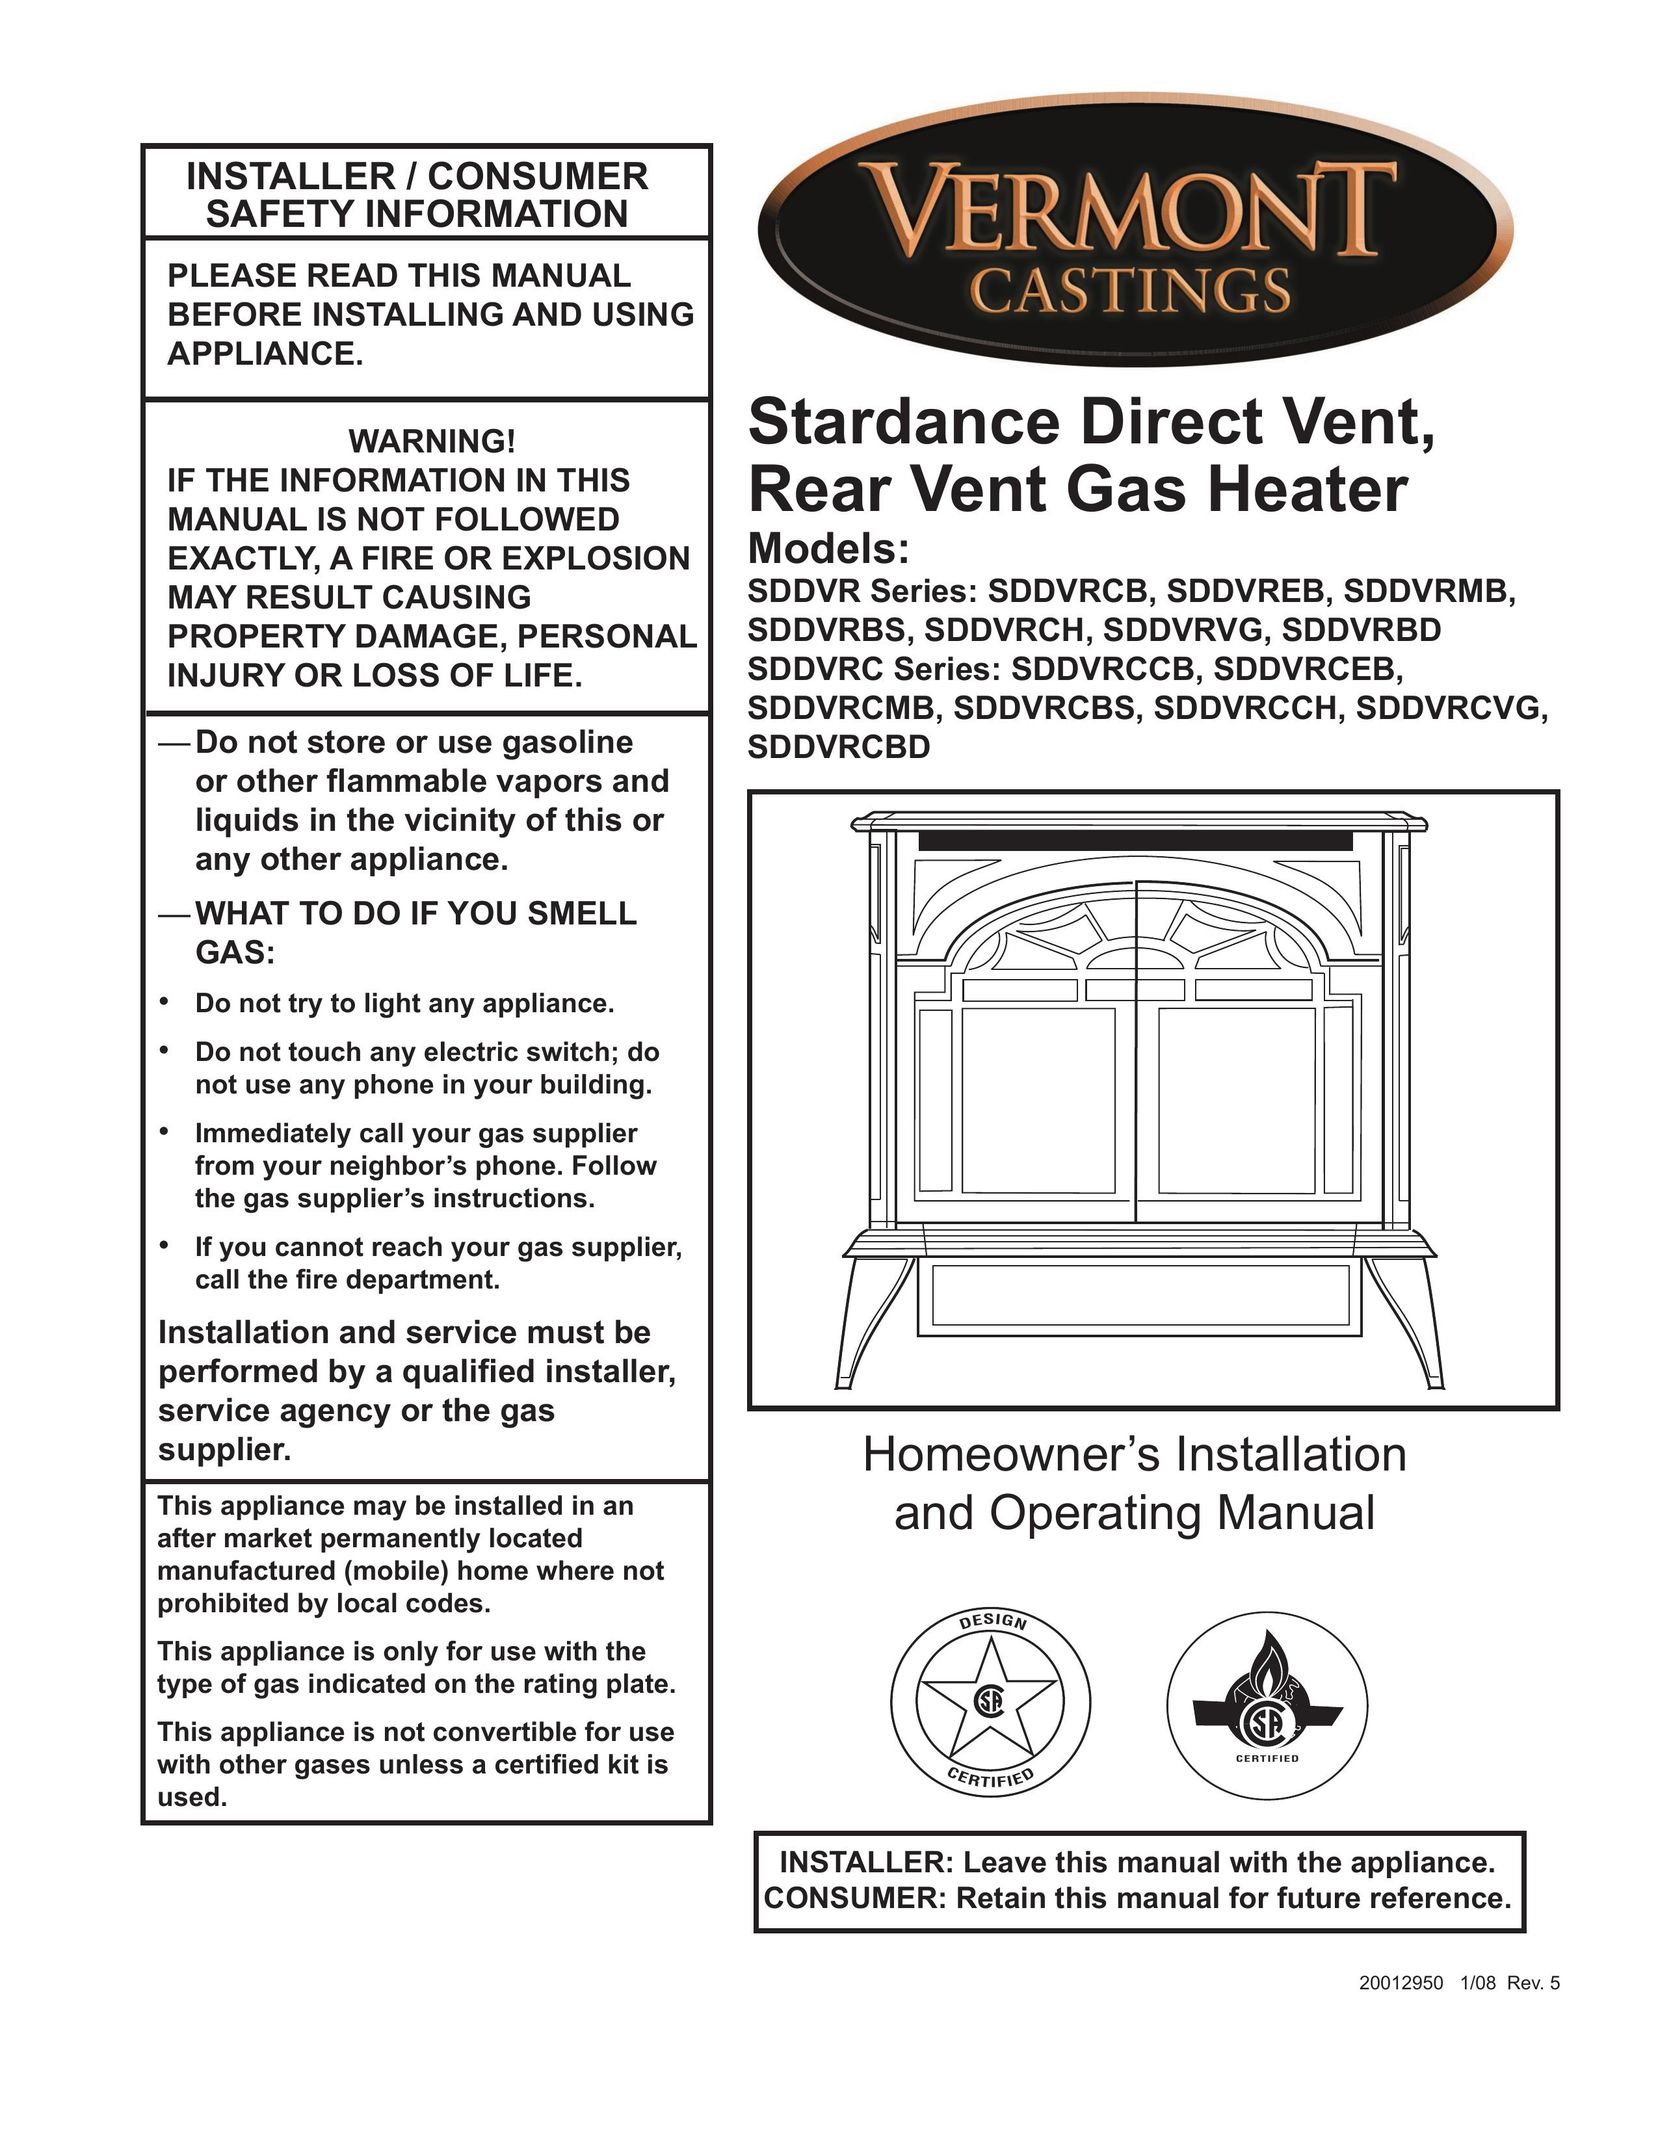 Vermont Casting SDDVREB Gas Heater User Manual